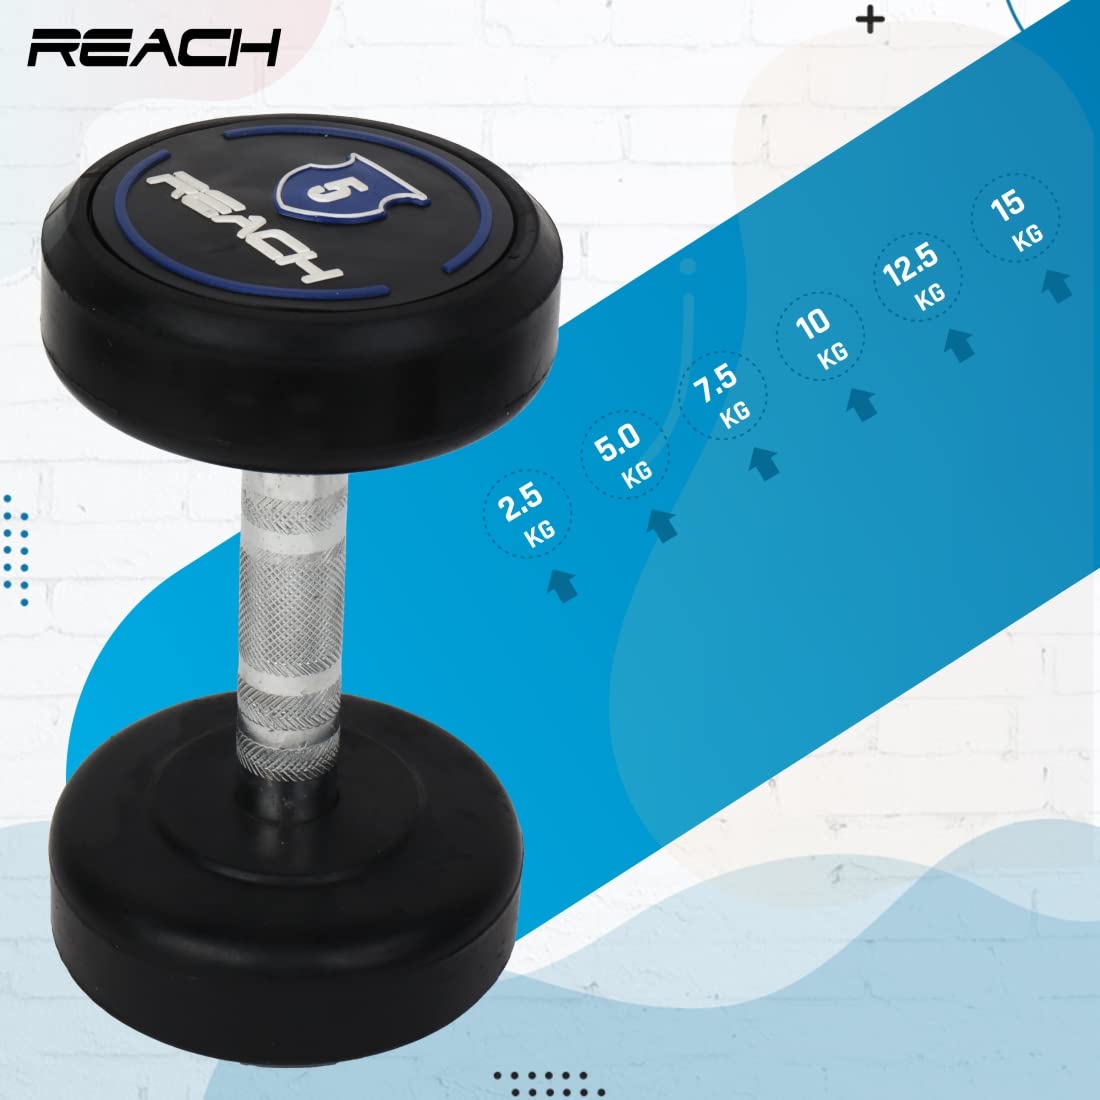 Reach Round Rubber Dumbbells 5 Kg Set of 2 for Men & Women | Gym Equipment Set for Home Gym Workout & Exercise | For Strength Training & Fitness Accessories & Tools